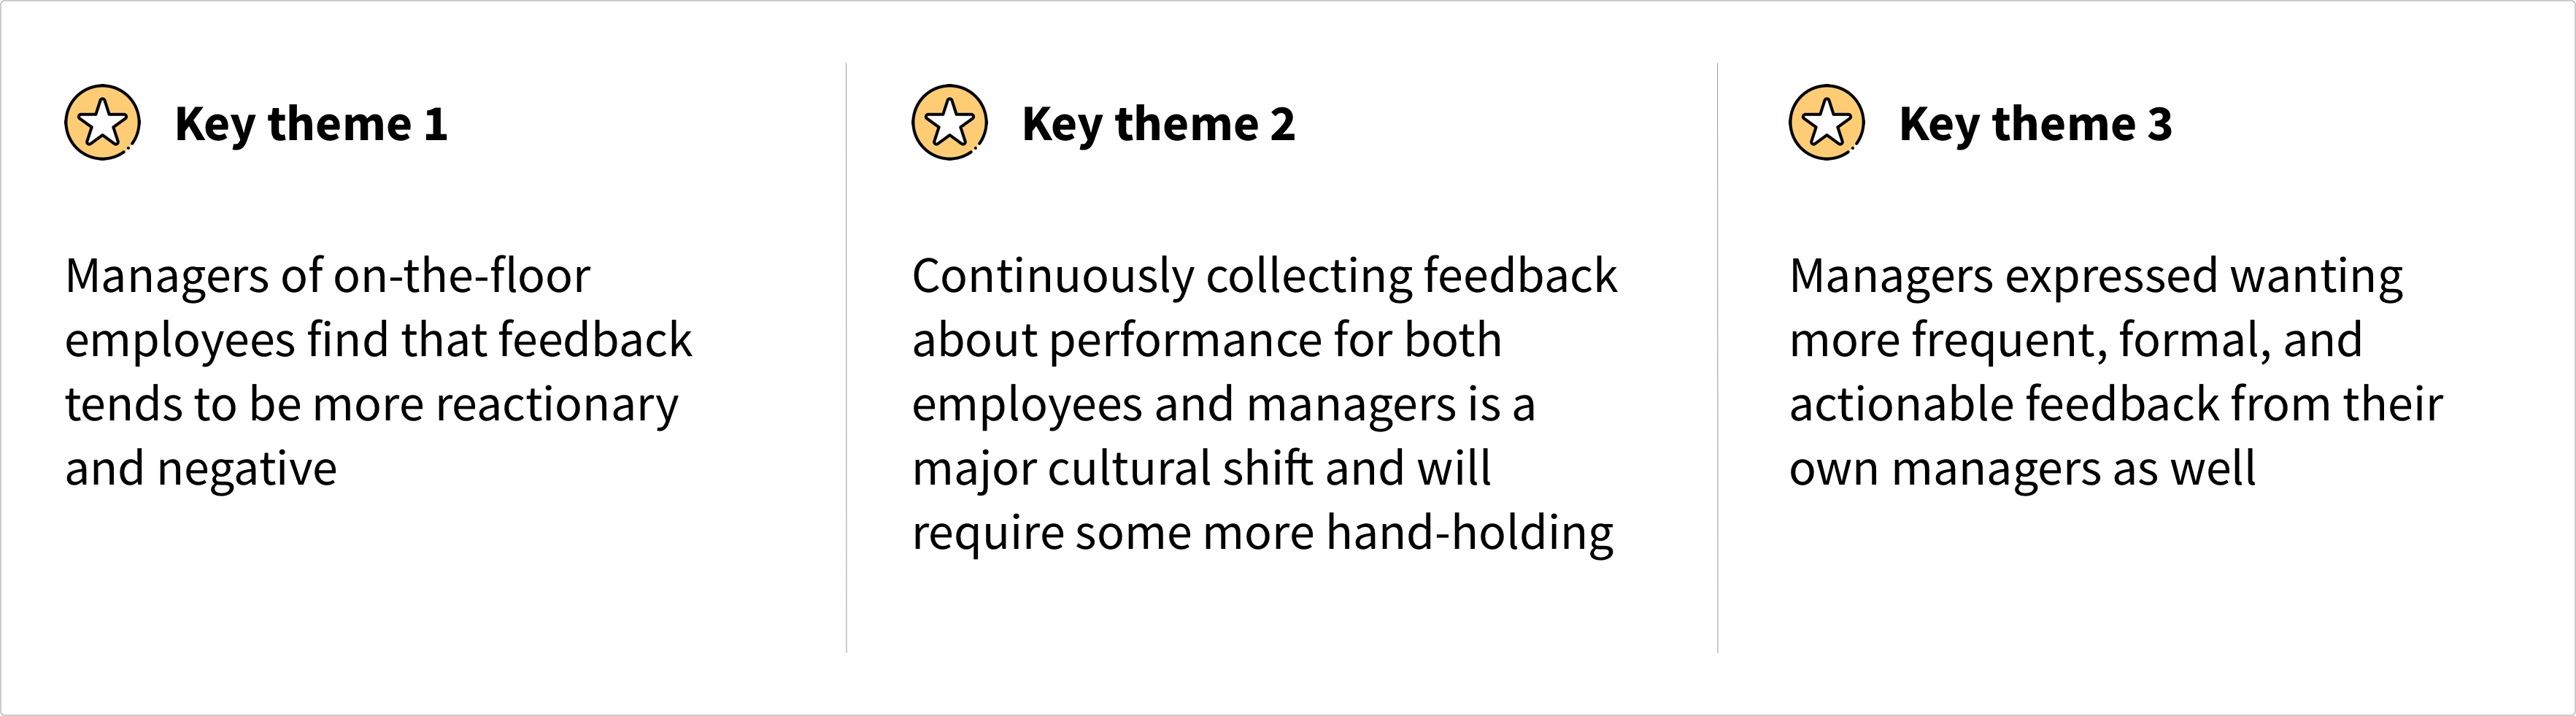 3 themes: 1) feedback tends to be more reactionary 2) continuous feedback is a culture shift 3) managers want feedback from their own directors as well